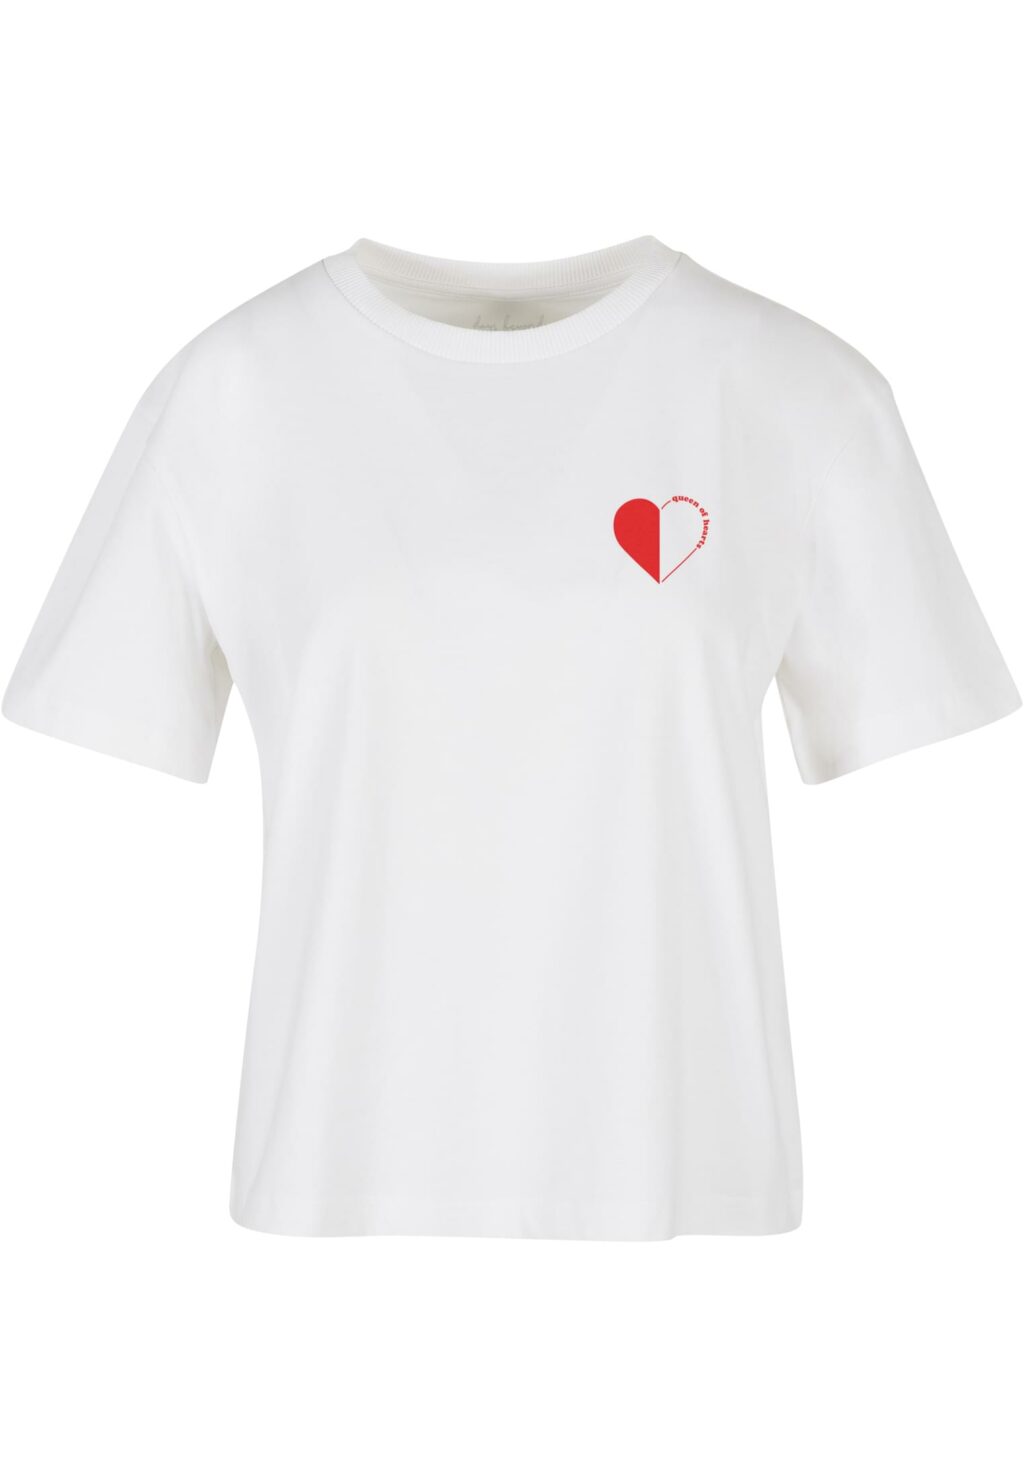 Queen of Hearts Tee white BE020